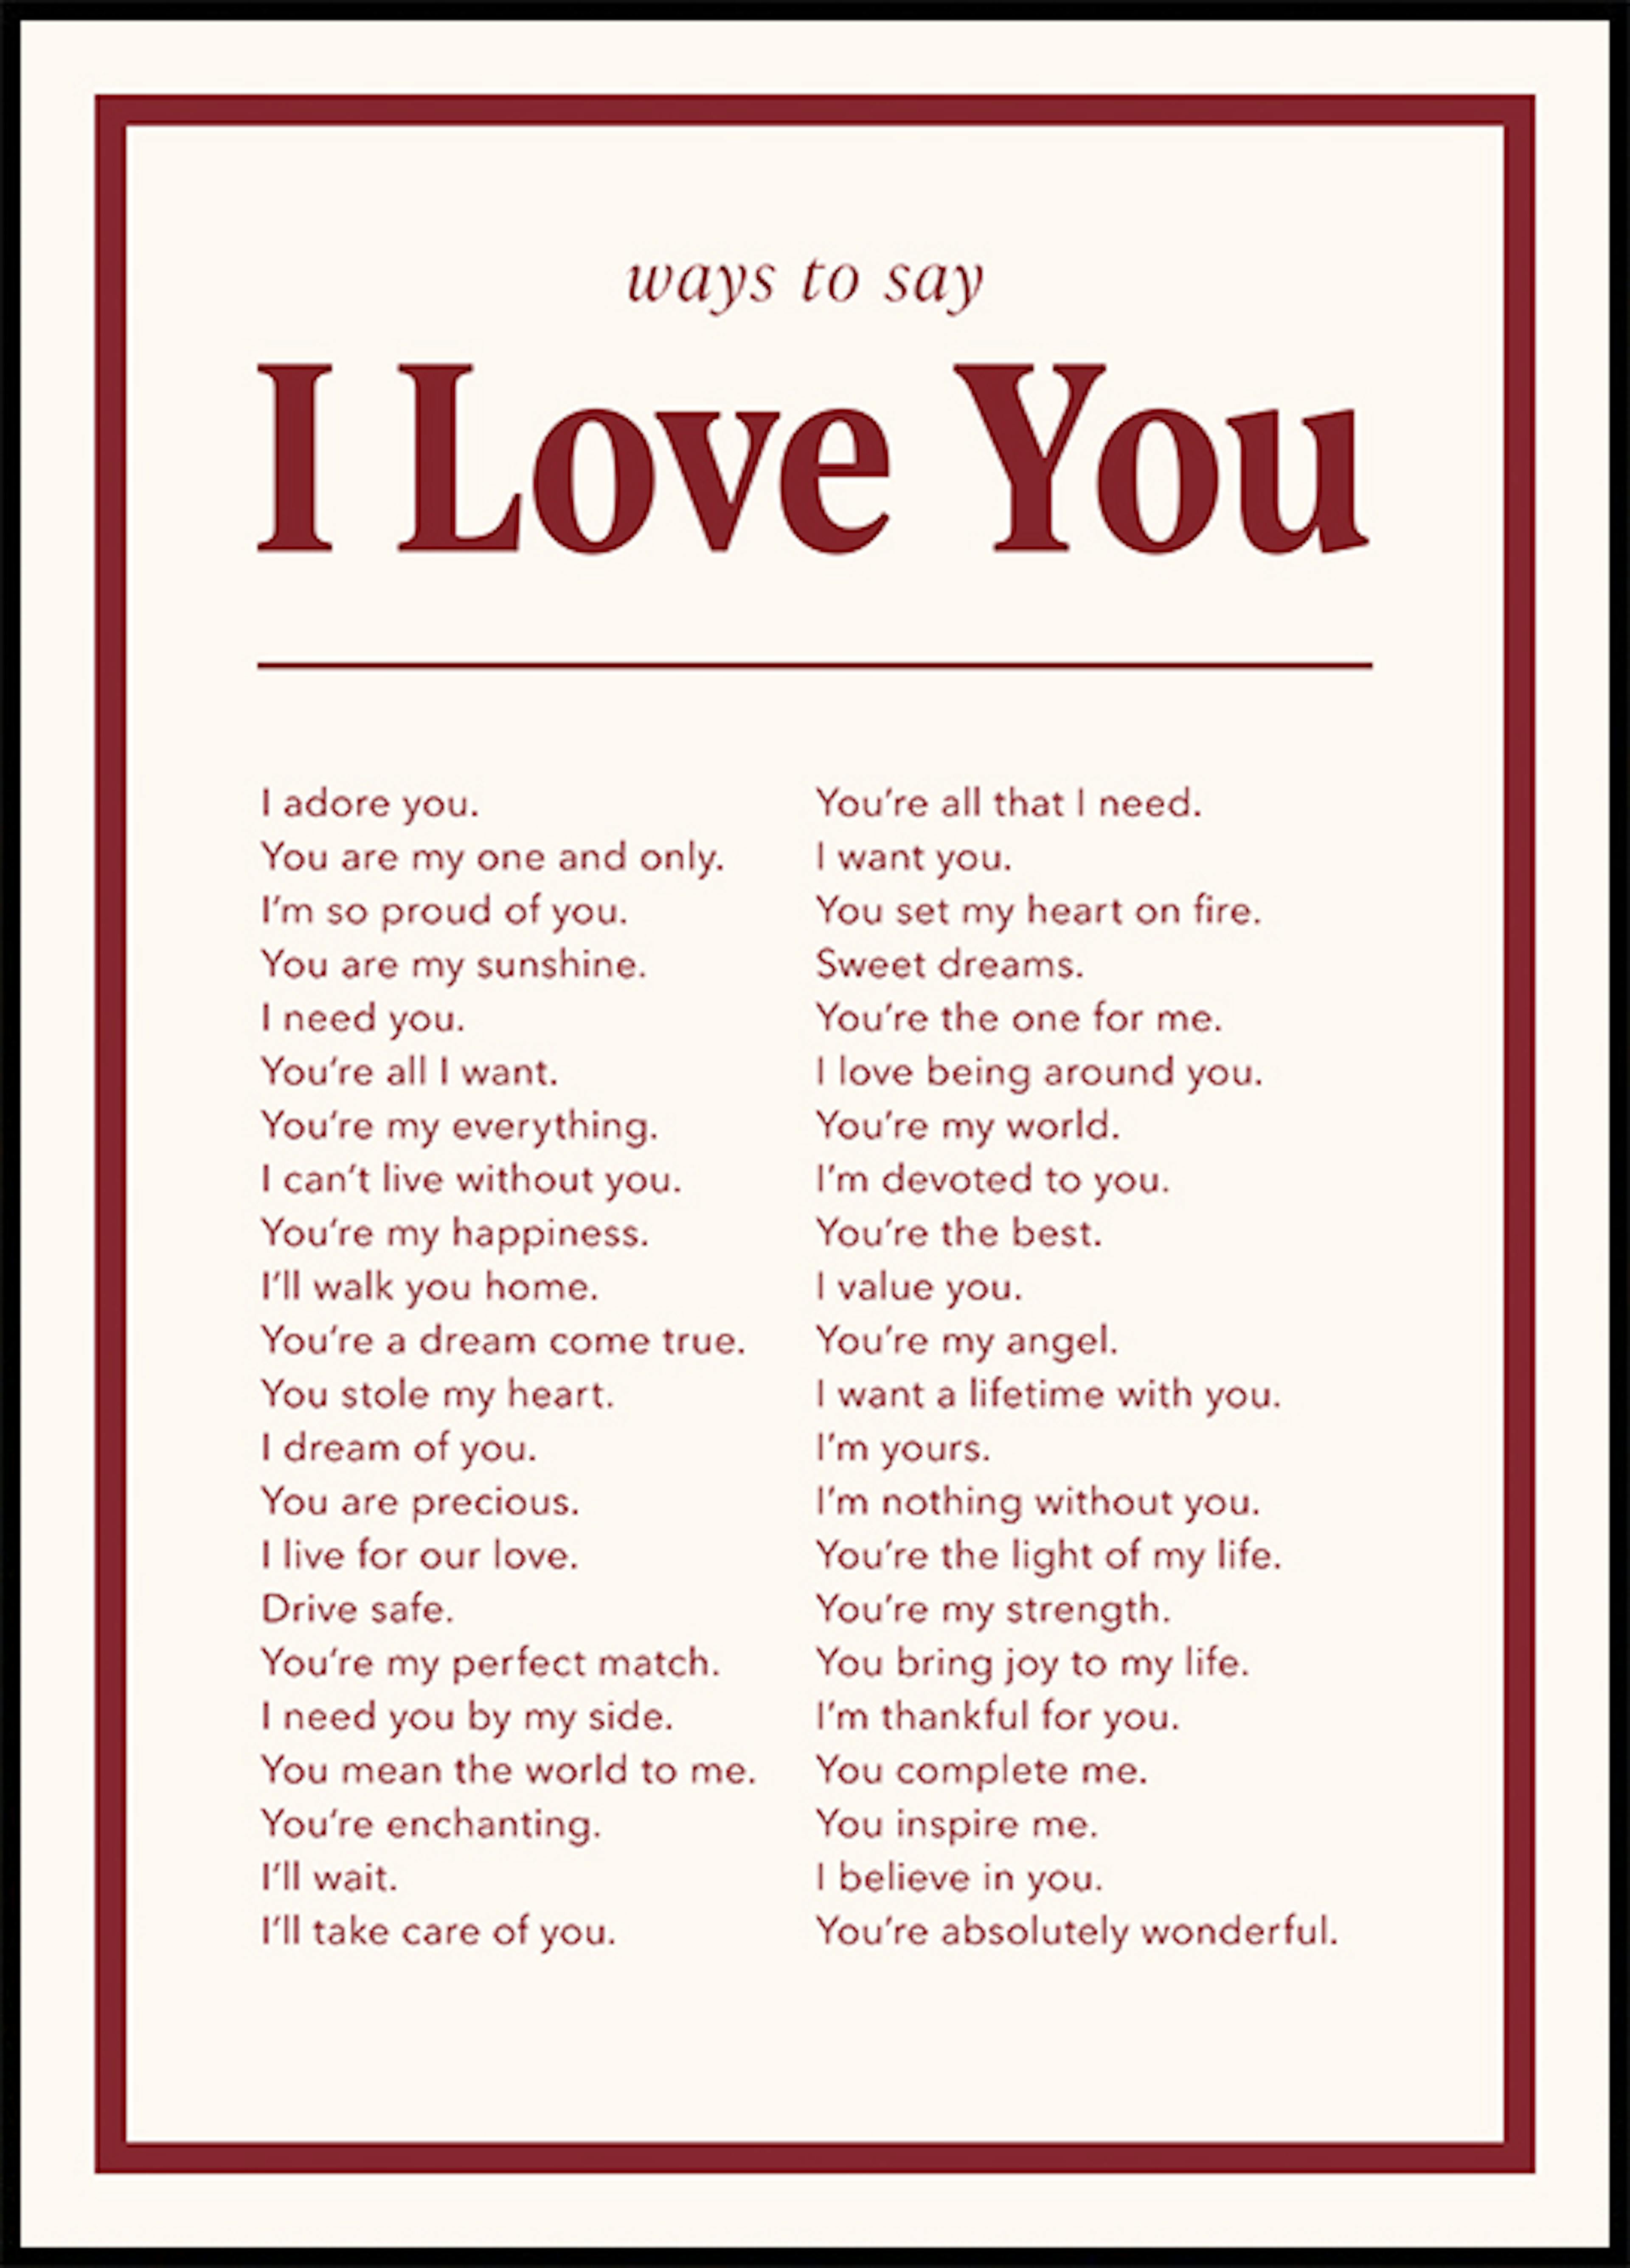 Ways to Say I Love You Poster 0